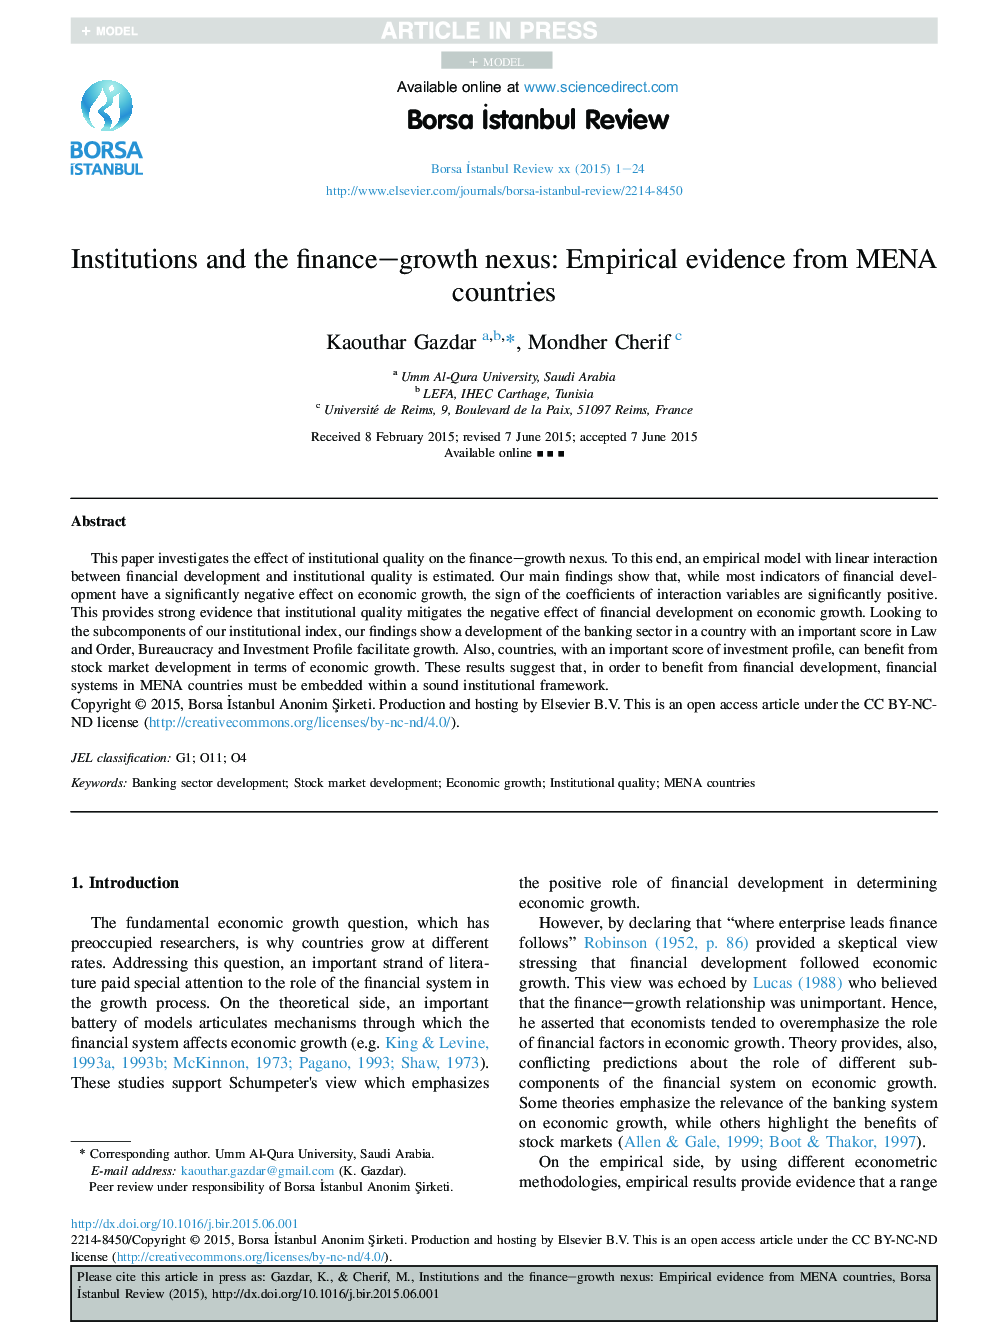 Institutions and the finance-growth nexus: Empirical evidence from MENA countries